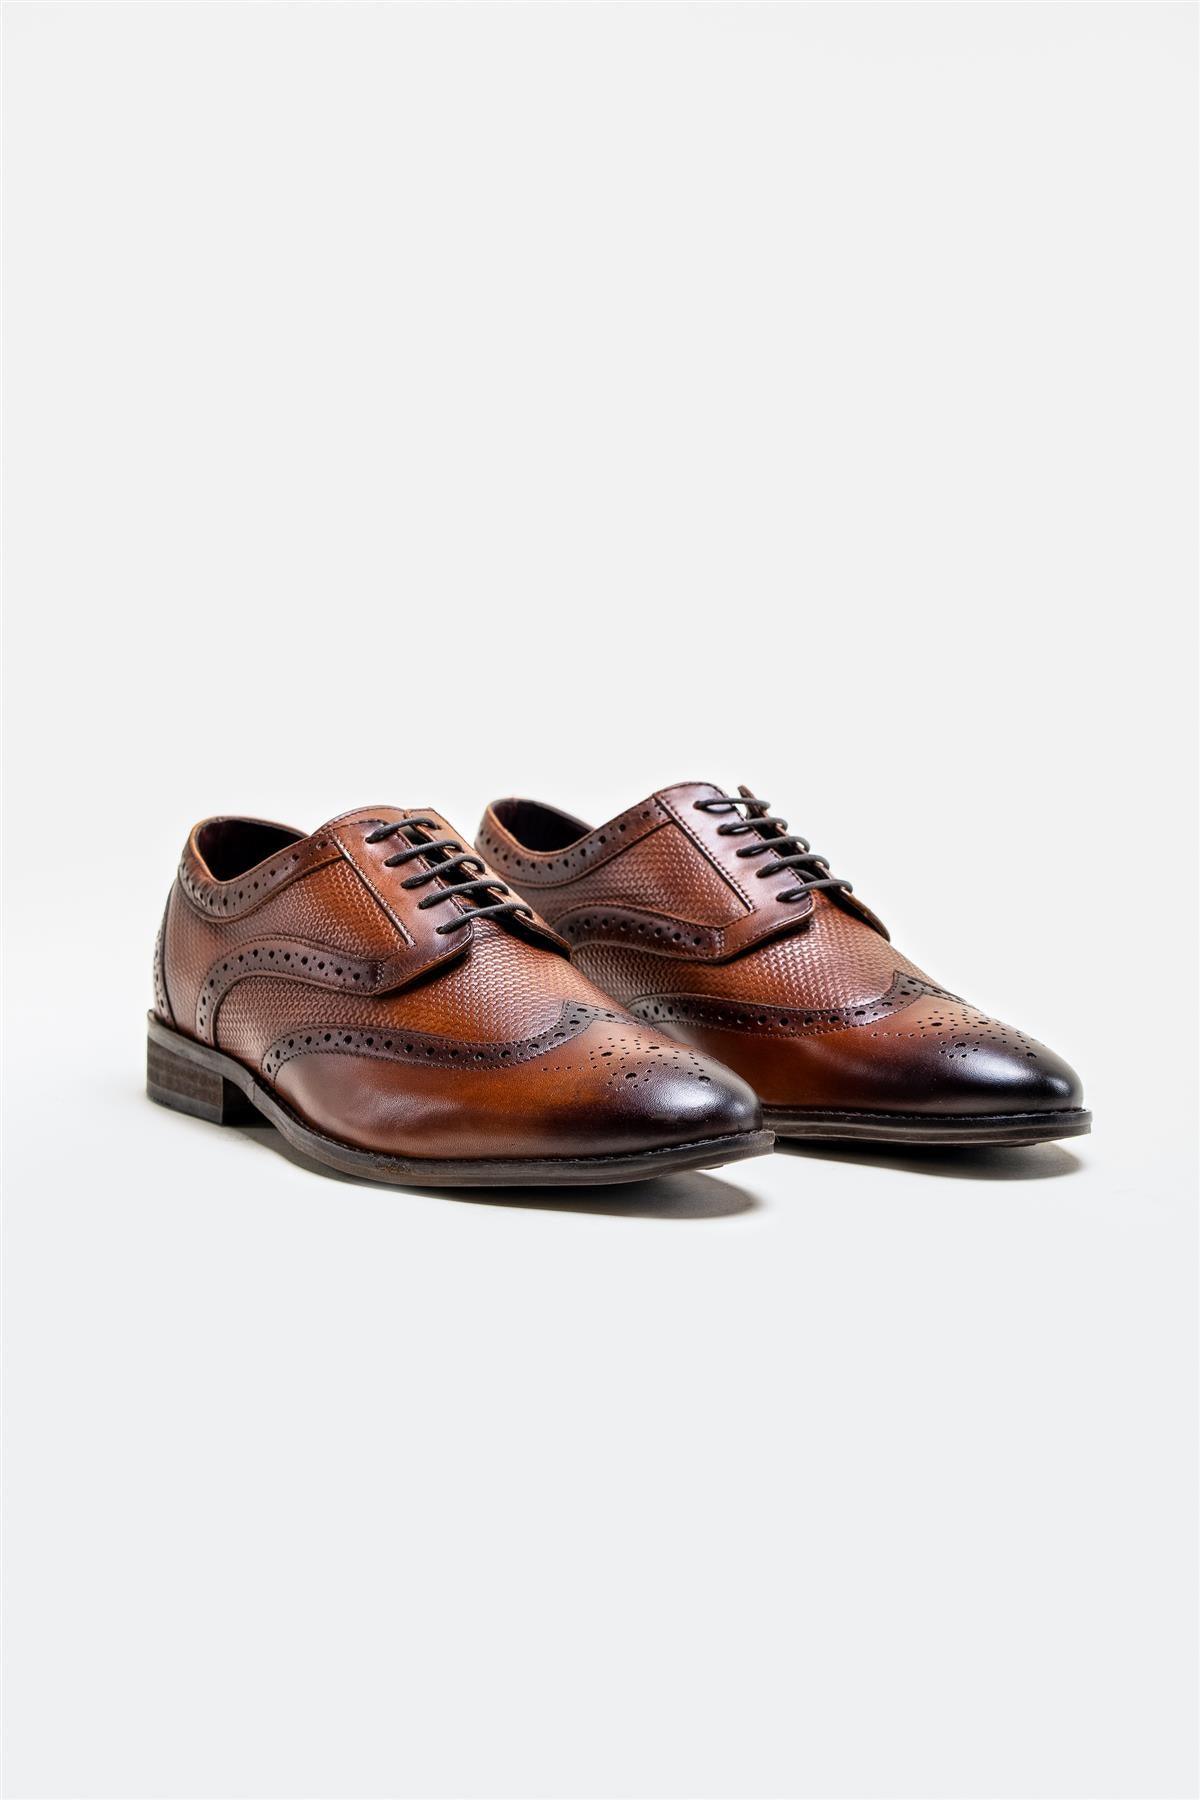 Orleans brown shoe front